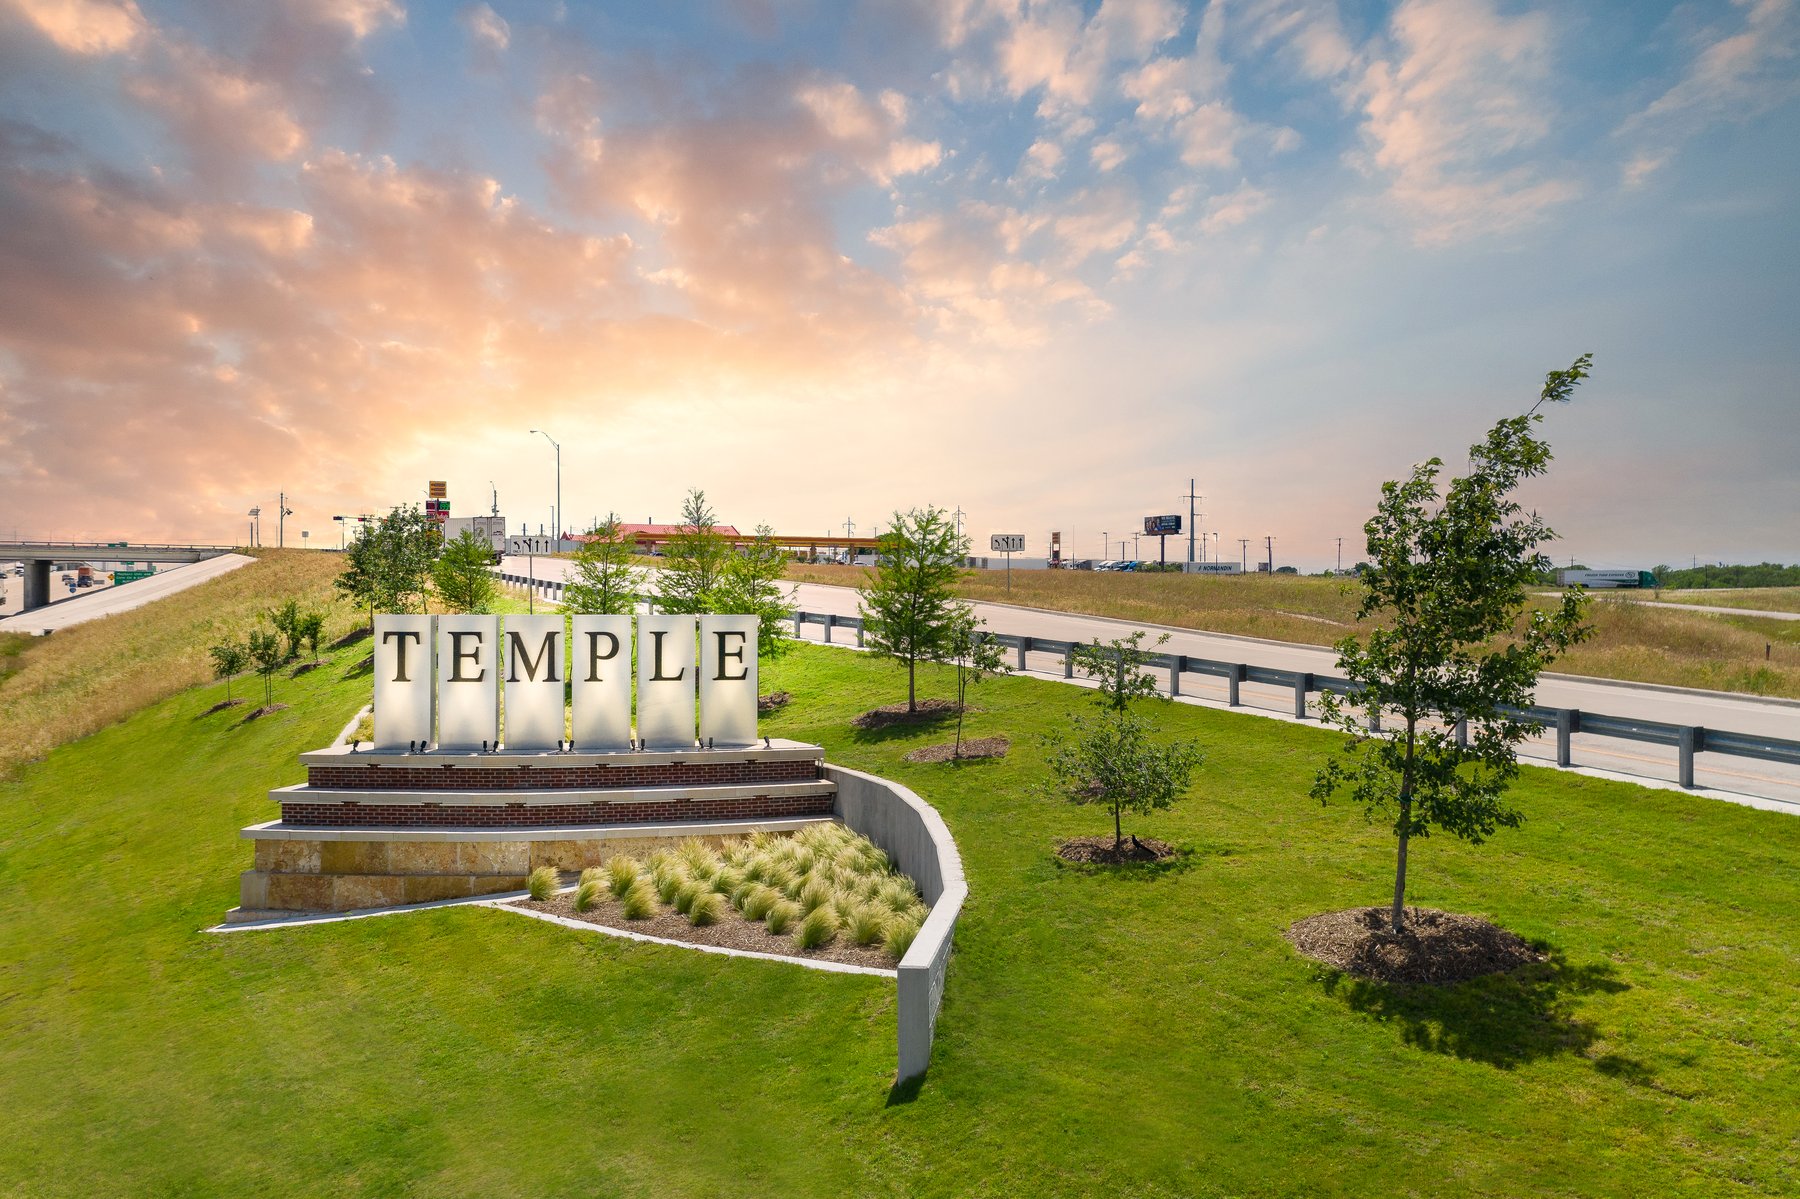 7 Reasons Why You Will Love Calling Temple “Home”